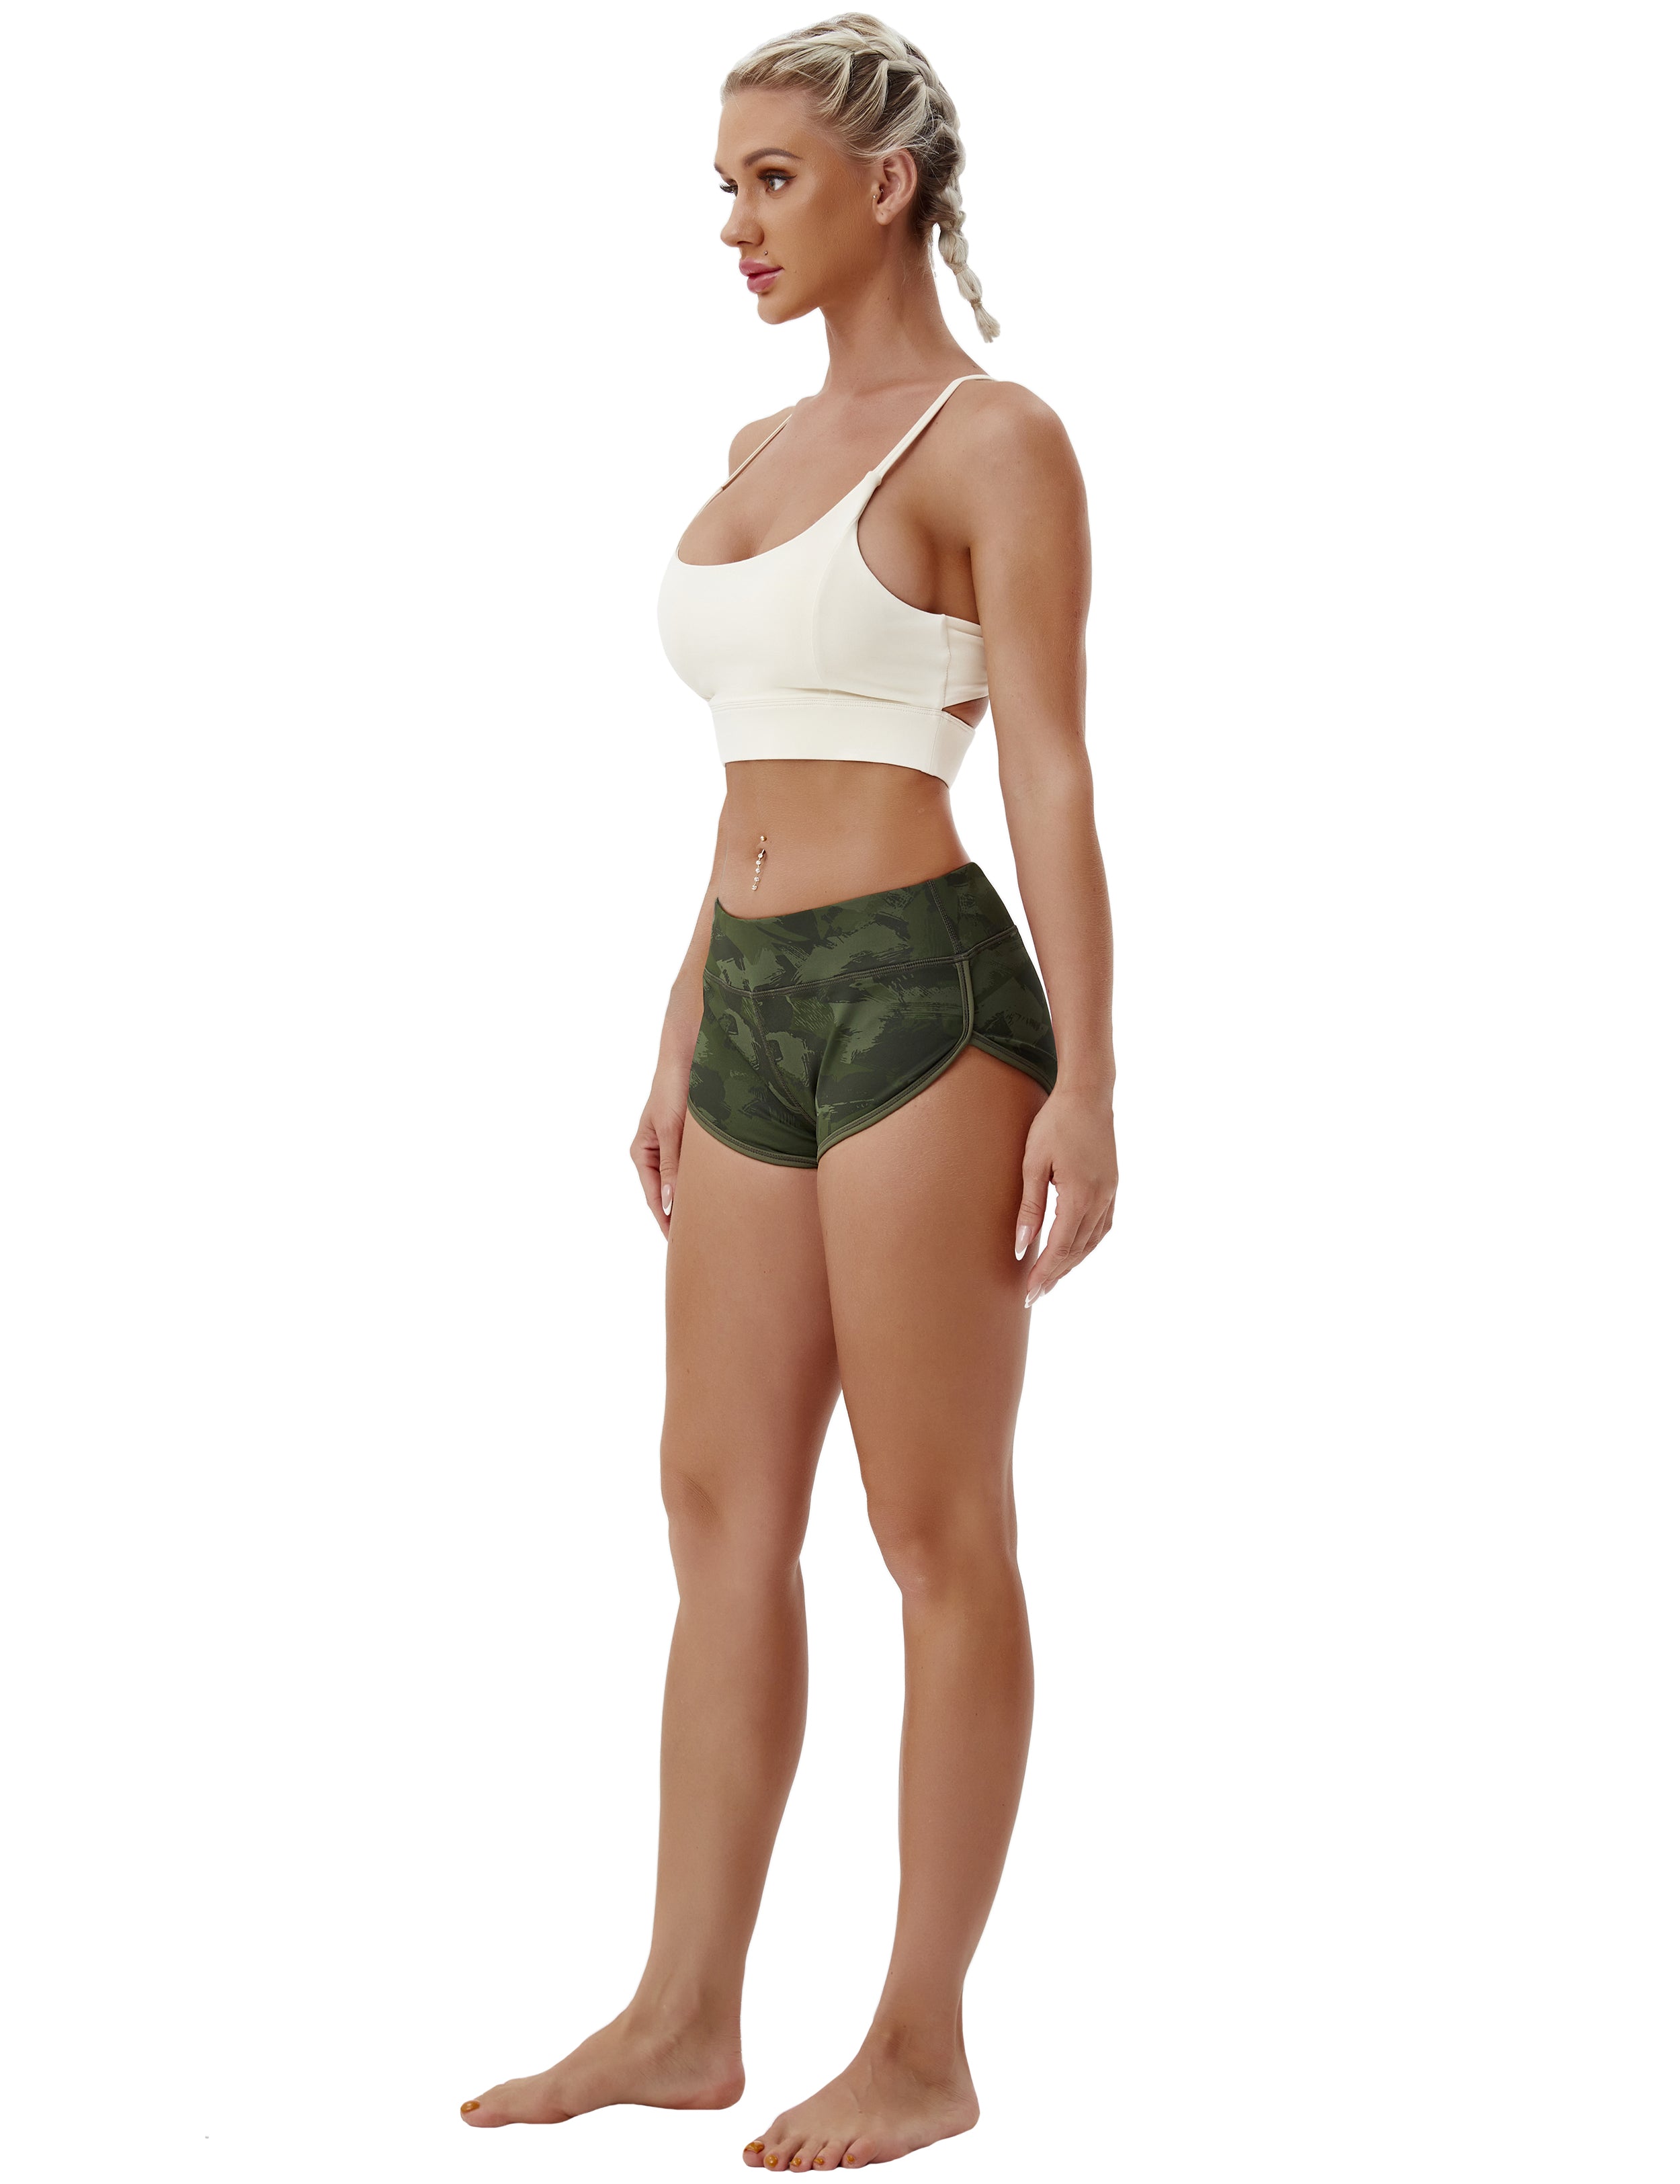 Printed Booty Tall Size Shorts green brushcamo Sleek, soft, smooth and totally comfortable: our newest sexy style is here. Softest-ever fabric High elasticity High density 4-way stretch Fabric doesn't attract lint easily No see-through Moisture-wicking Machine wash 78% Polyester, 22% Spandex